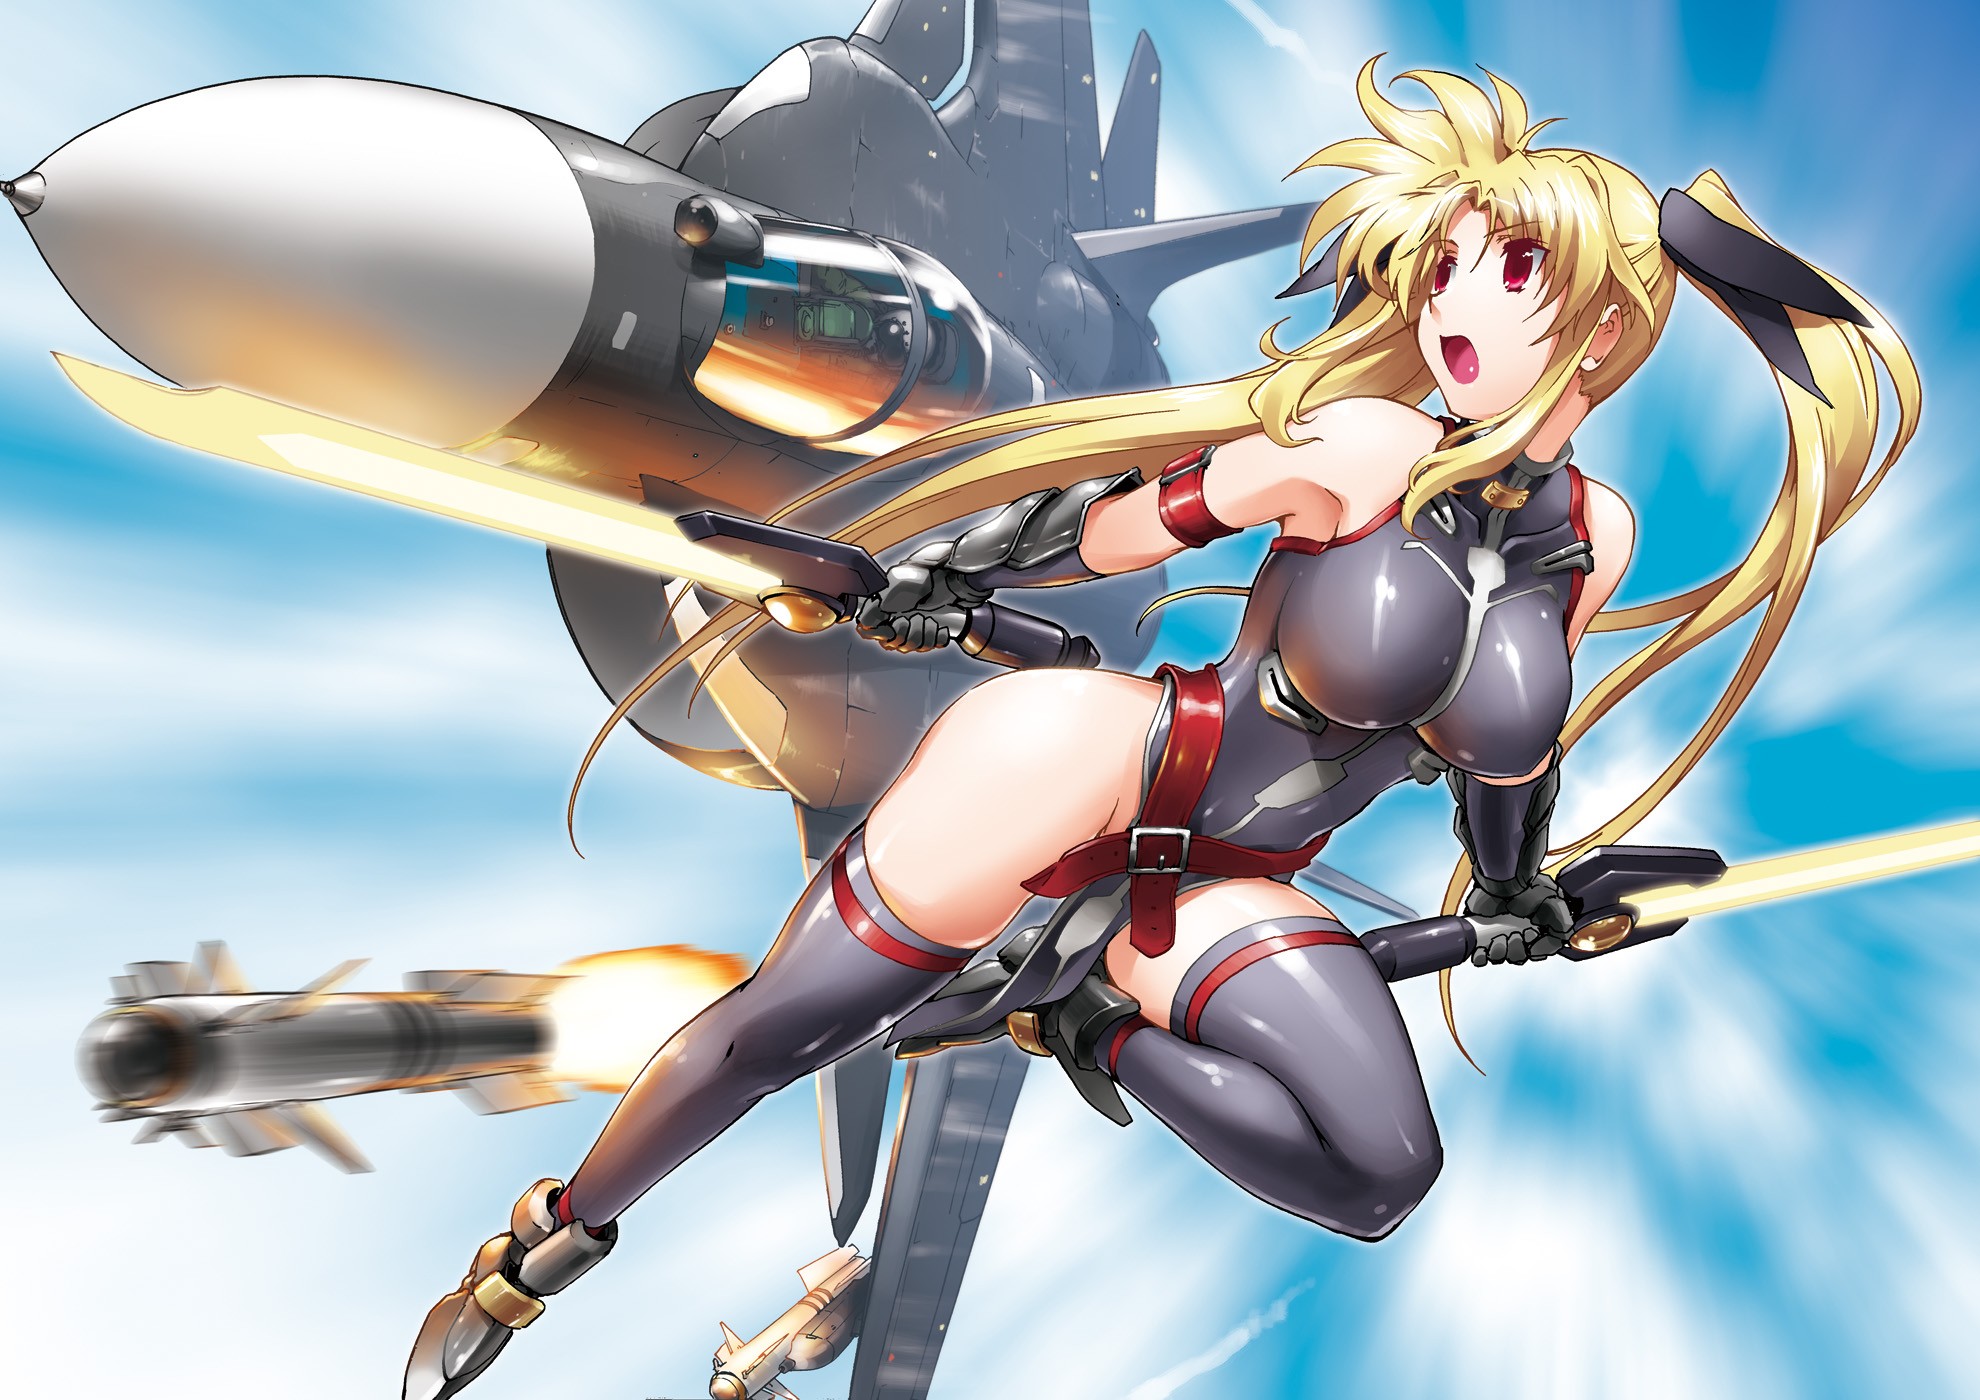 Anime 1980x1400 Fate Testarossa Mahou Shoujo Lyrical Nanoha big boobs anime girls anime boobs legs stockings aircraft missiles military aircraft military vehicle military vehicle blonde open mouth red eyes women with swords long hair twintails jet fighter